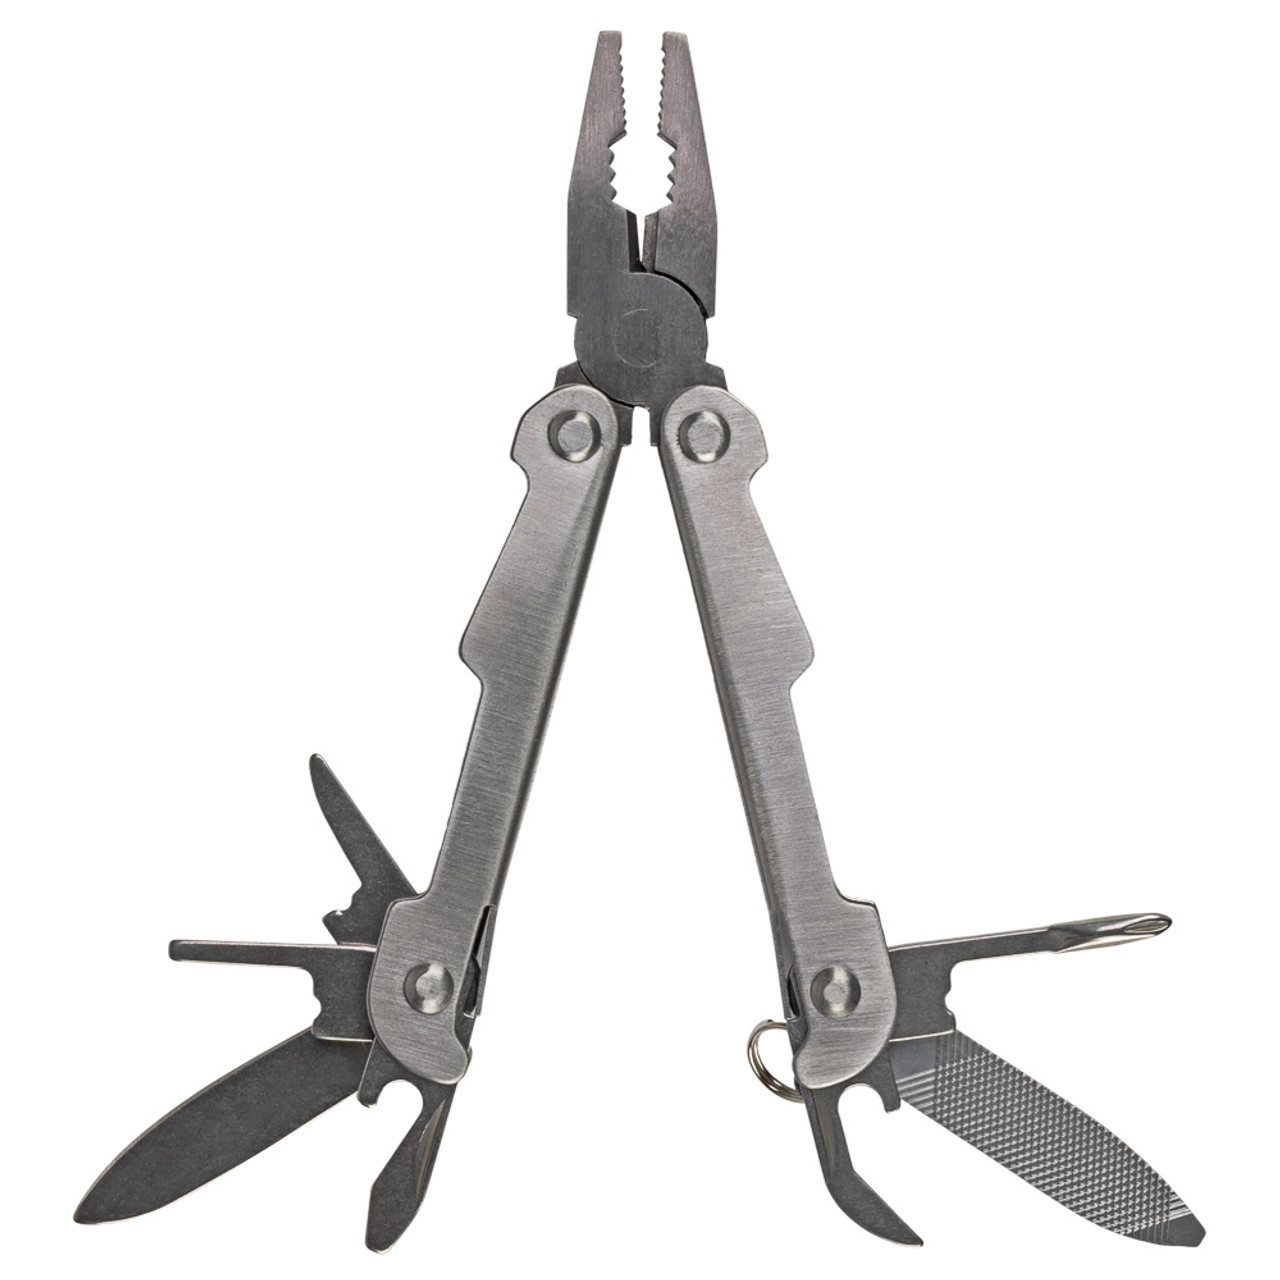 NavePoint Stainless Steel Compact 12 in 1 Pocket Multi Tool With Belt Loop Sheath 5 inch